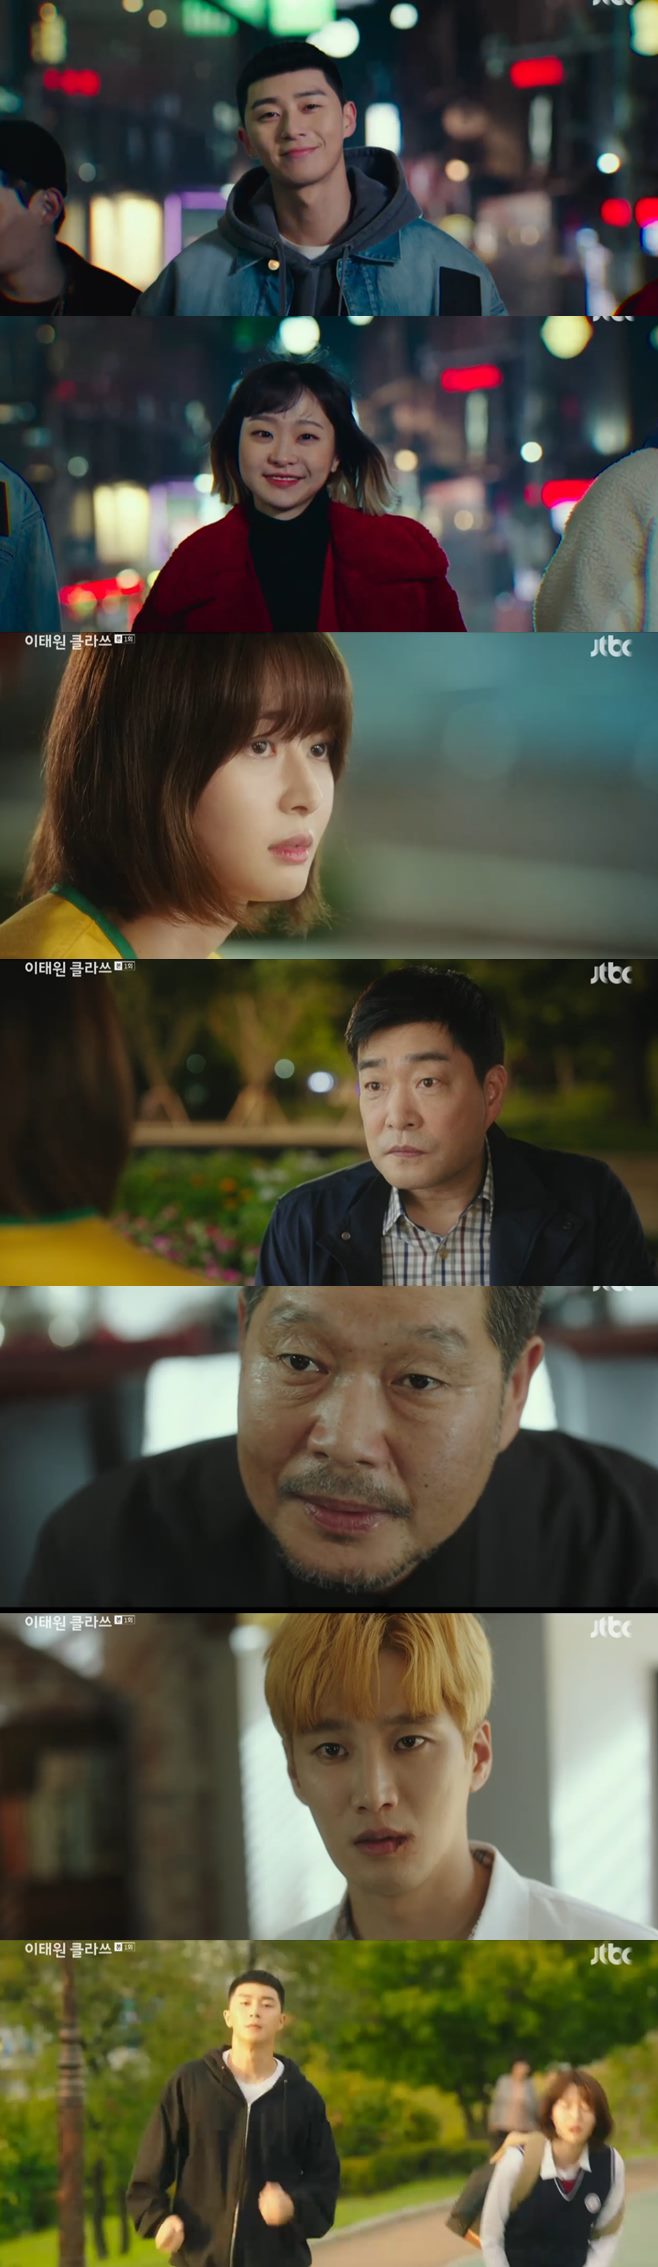 Maybe the other name of youth is personality.The young people with various colors, including Itaewon Clath Park Seo-joon, Kim Da-mi, Kwon Nara and Kim Dong-hee, attracted viewers at once.The result of the original work, which was attractive to the original webtoon ending, Joy, and the character feast such as the Park, was literally unknown, but it would be summarized as a warm youth human play somewhere.In the first episode of JTBCs gilt drama Itaewon Klath (directed by Kim Sung-yoon), which was first broadcast on the night of the 31st, Park Seo-joon, Joy Seo (Kim Da-mi), Jang Dae-hee (Yoo Jae-myung), Oh Soo-a (Kwon Nara), Jang Geun-soo (Kim Dong-hee), Jang The Fountainhead (An Bo-hyun), Kang Min-jung (Kim Kim) The youth rebellions were drawn by Choi Seung-kwon (Ryu Kyung-soo), Ma Hyun-yi (Lee Joo-young), Lee Ho-jin (Lee Idawit), Kim To-ni (Chris Ryan), Park Sung-yeol (Son Hyun-joo), Oh Byung-hun (Yoon Kyung-ho), and Cho Jeong-min (Kim Yeo-jin).Itaewon Klath is a remake of the original webtoon Dongmyeong.The story is about what happens when young people such as Roy, who has experienced school violence, Joy, Jang Dae-hee, and Oh Soo-ah gather to run a small Itaewon restaurant.On the first day of the show, the overwhelmingly conscientious and charming character, Park, was highlighted.Roy, who seems to be blunt and rough, but lives in the world with his own cohesion and values, had his father, Park Sung-yeol, who raised him.For the new Roy, Park Sung-yeol was the Alachua County in a world that was stronger than anyone else.Roy could not condone the bullying of the leading Changs son, The Fountainhead.He eventually came to punish the Fountainhead, and Jang Dae-hee, who had to wrap his son, called Park and Park Sung-yeol, the manager who worked in the house.Roy did not give in to the pressure of the chairman to kneel, because he had faith in what he had done.Park Sung-yeol is also proud of his son, saying, It does not matter like a school diploma.I wanted you to live with your heart unlike me. He advised me that he would like his son to fly much better.At the end of the show, Park Sung-yeol, the best mate of the Roy, was suddenly in an accident.Roy, who had left his father, stood before the audience with a bloodline, a struggle to fight the tough world, a painful beginning of a youth record with tears, laughter, anger and joy.Itaewon Klath has been known to have a high synchro rate of Park Seo-joon and Kim Da-mi, which were selected as the main characters, Roy and Joy, since the production.The drama and film production were fully anticipated because there were many young characters who were attracted to the issue, with the original webtoon endings and so on.The first veil, Itaewon Clath, followed the story of the webtoon and chose not to violate the Dongmyeong webtoon trend.This situation has made the original fans look good, and it has spread to optimism that the new audience will be introduced at the present time when many webtoons are dramatized.The actors hot-rolling was important: Joy, who was described as the most attractive character, including Park, was played by his personality, Actor Kim Da-mi.The sober youth Osua, who was abandoned by an individualist and mother, was immersed in Kwon Naras clean digestion.